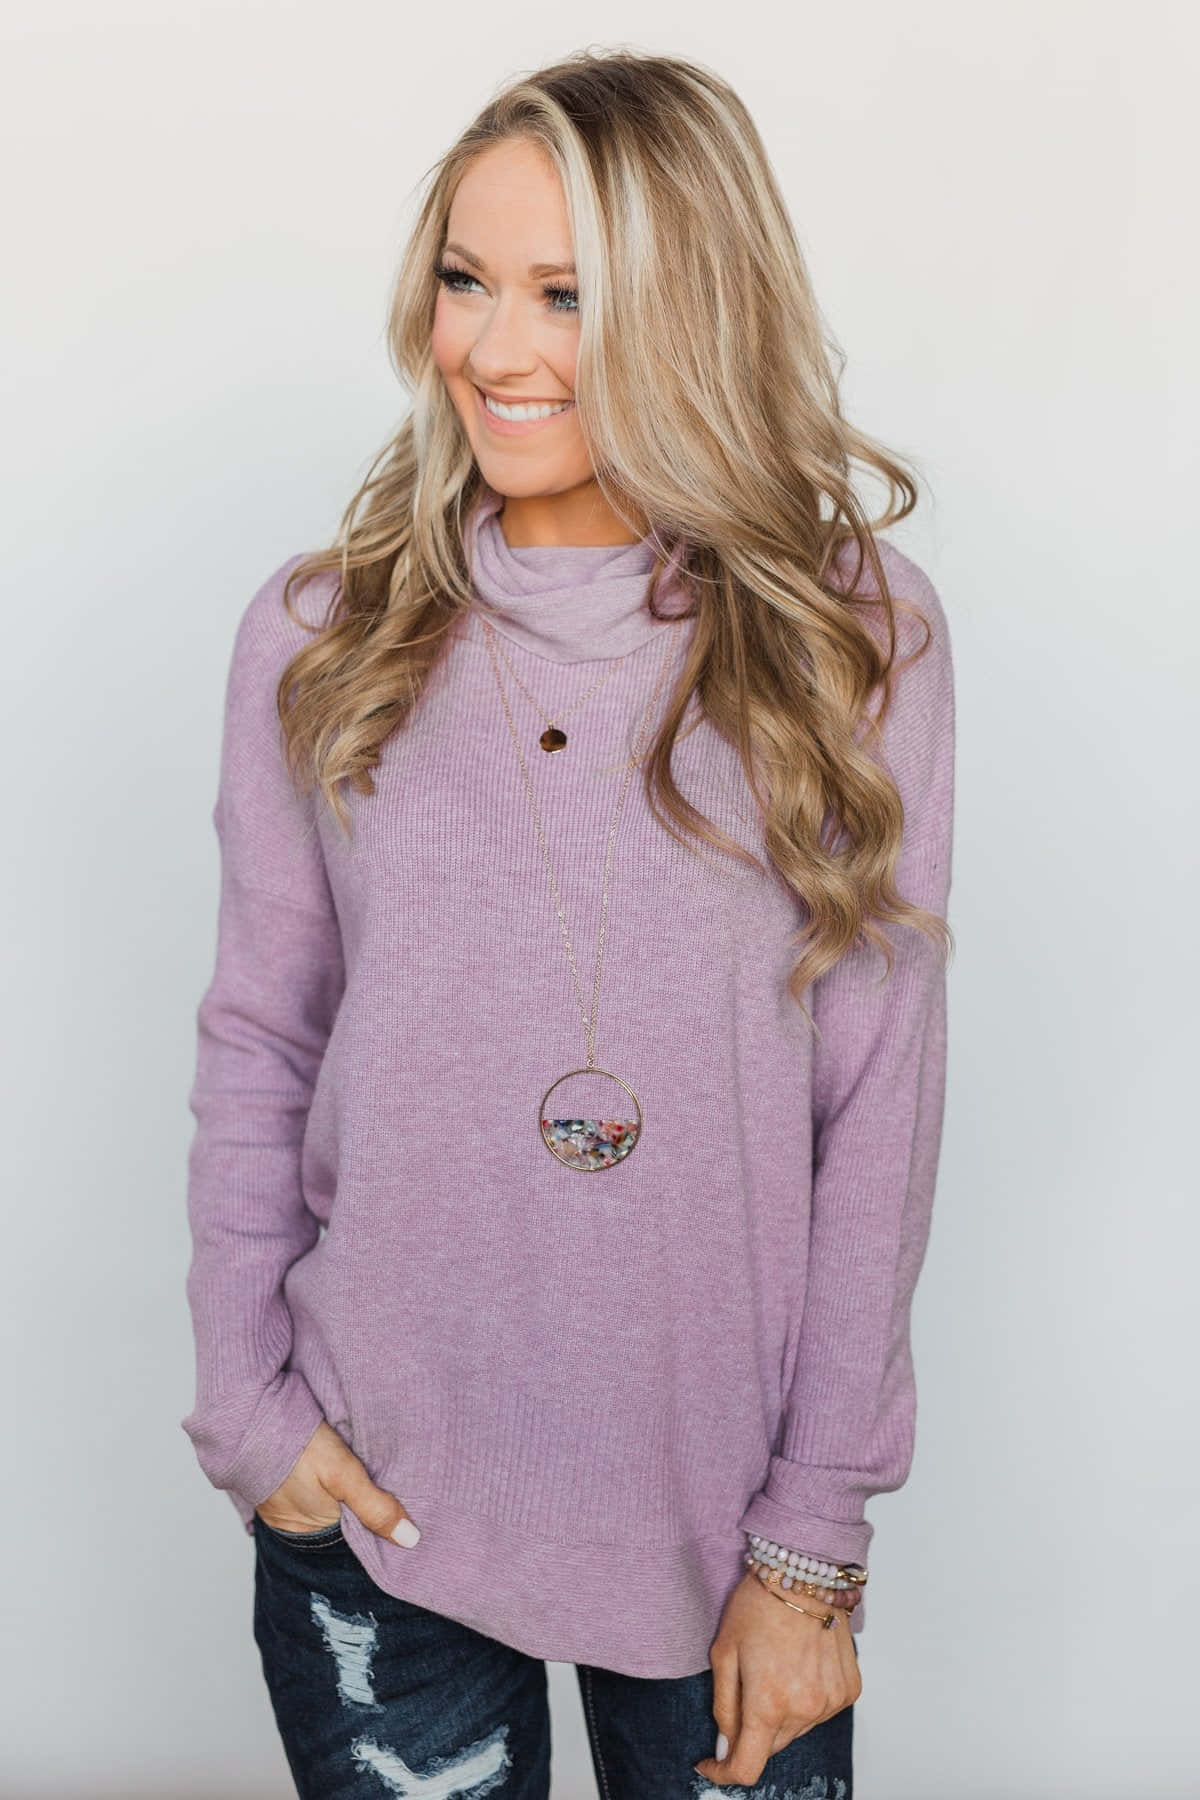 A classic and chic purple turtle-neck sweater is the perfect winterwear. Wallpaper